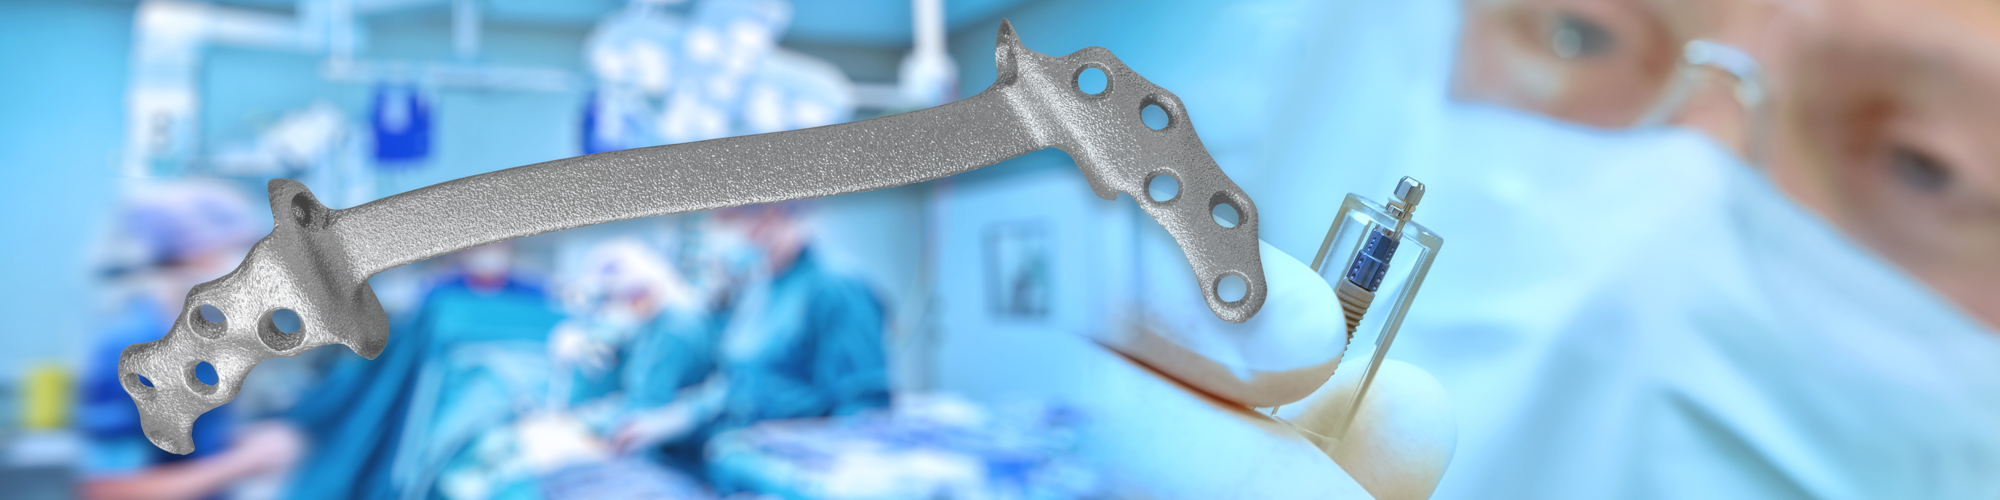 Medical instruments and implants